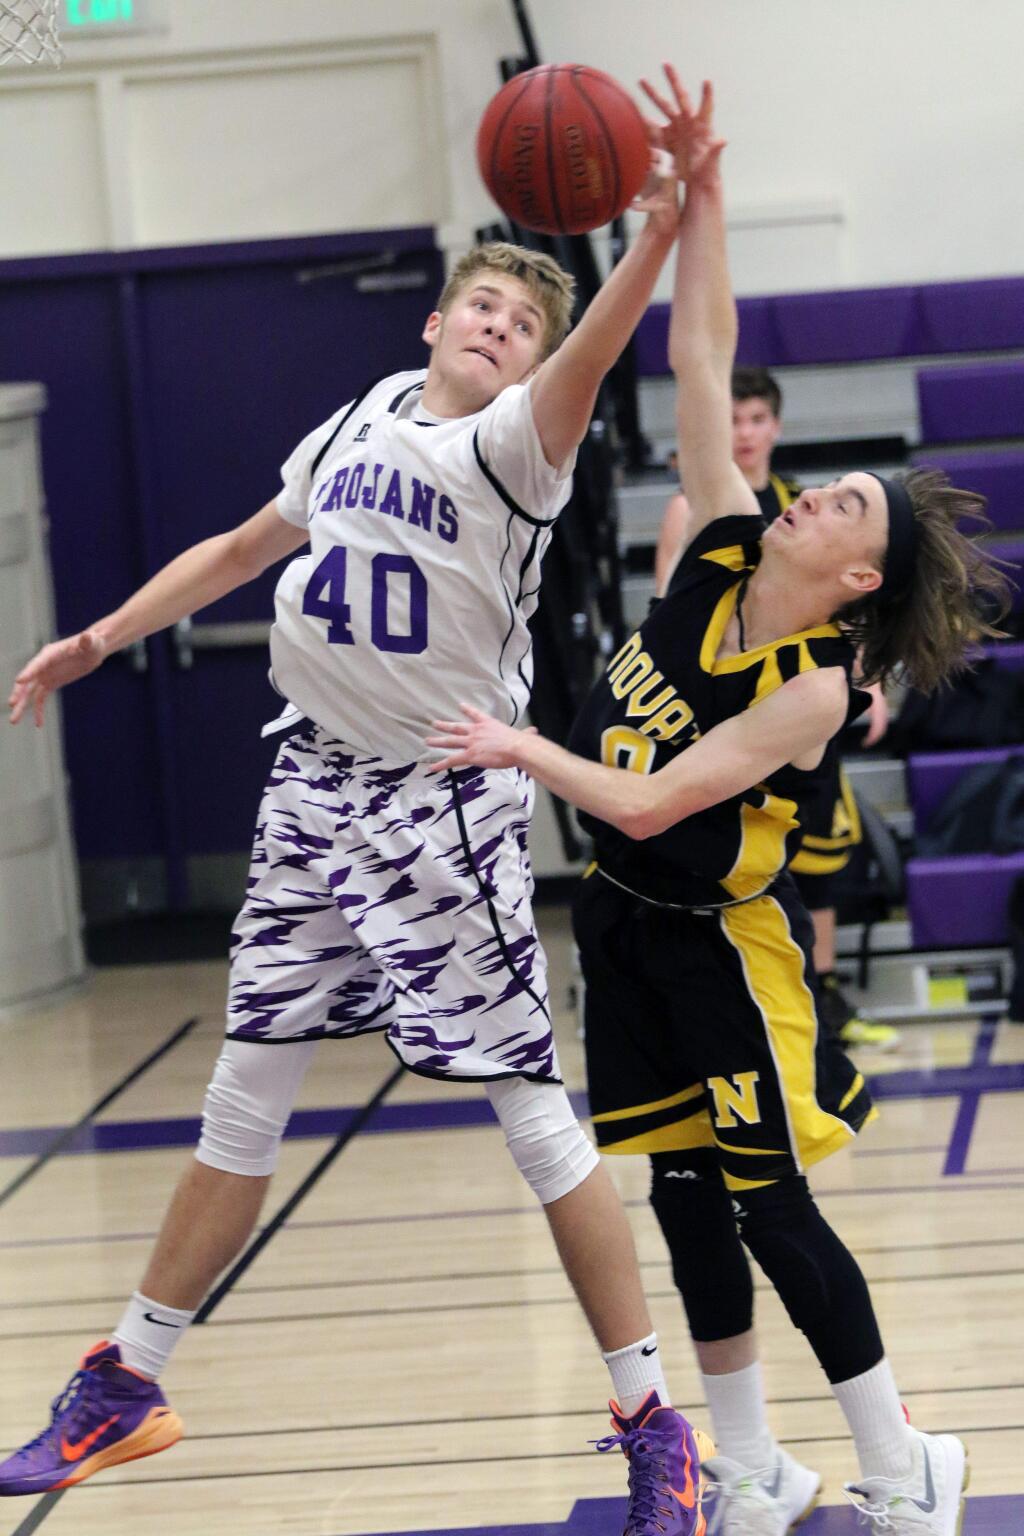 DWIGHT SUGIOKA/FOR THE ARGUS-COURIERPetaluma's Jack Anderson (40) battles for the basketball in his team's win over Novato Tuesday night.